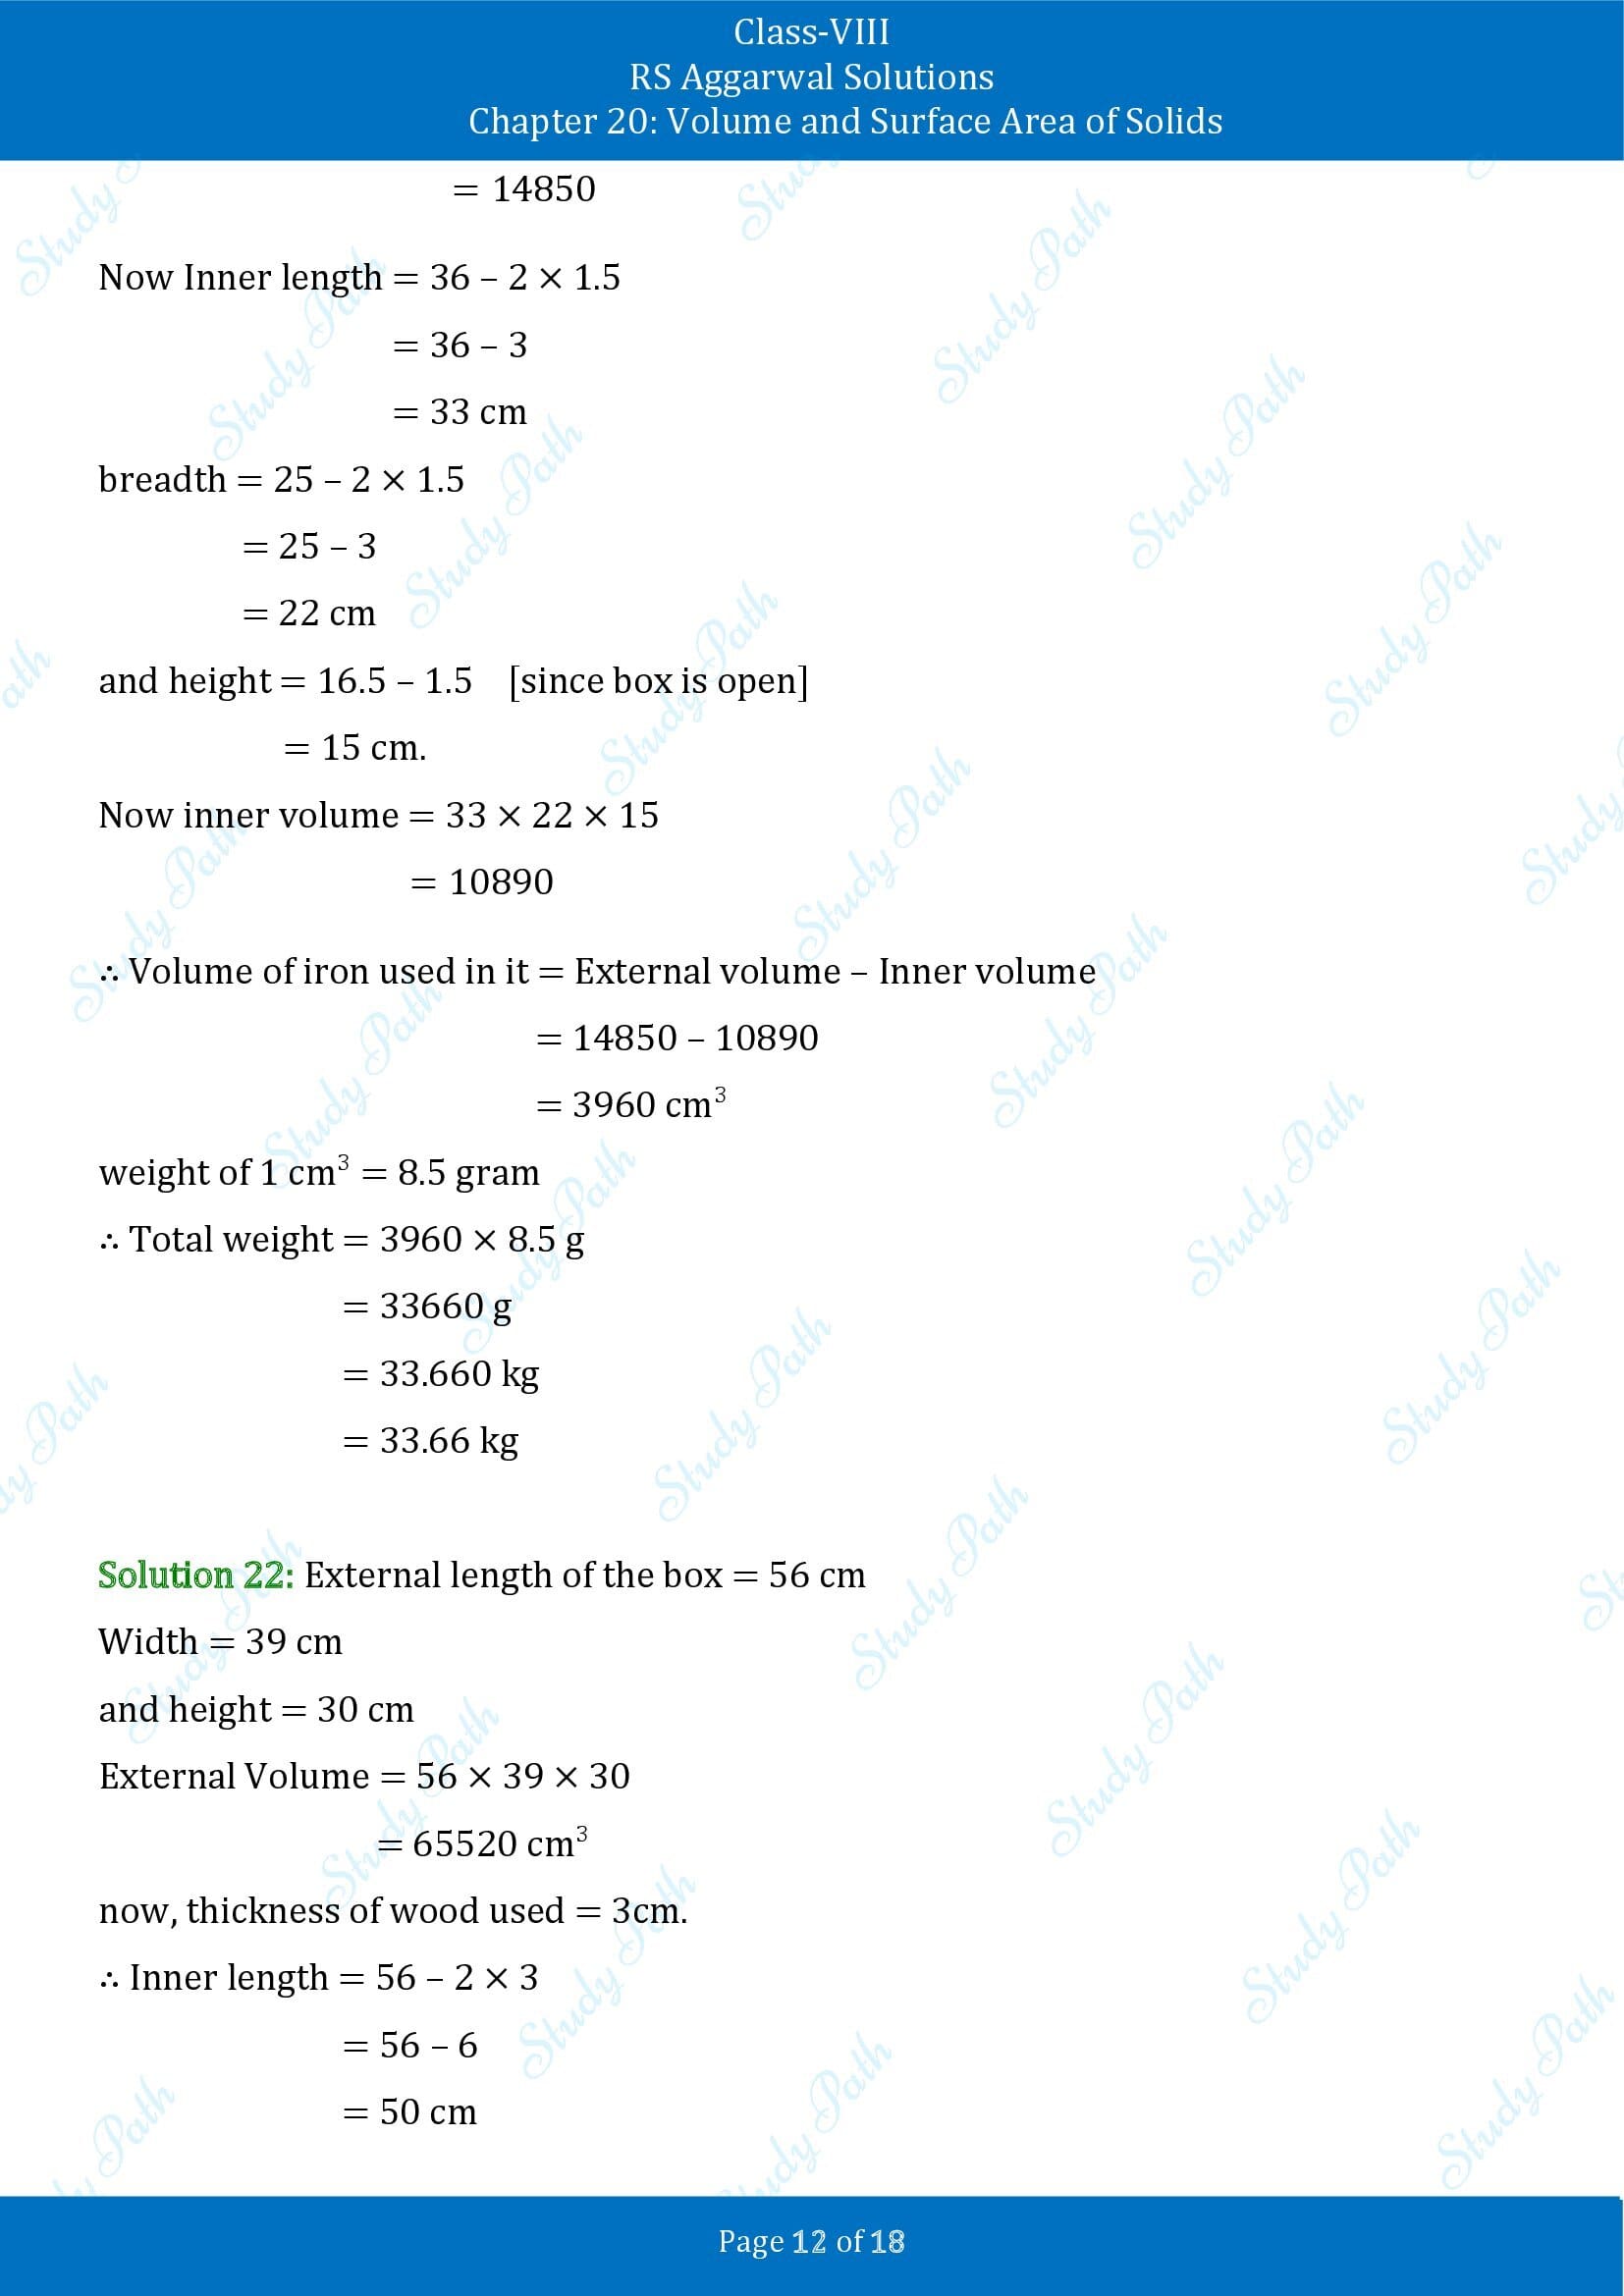 RS Aggarwal Solutions Class 8 Chapter 20 Volume and Surface Area of Solids Exercise 20A 00012